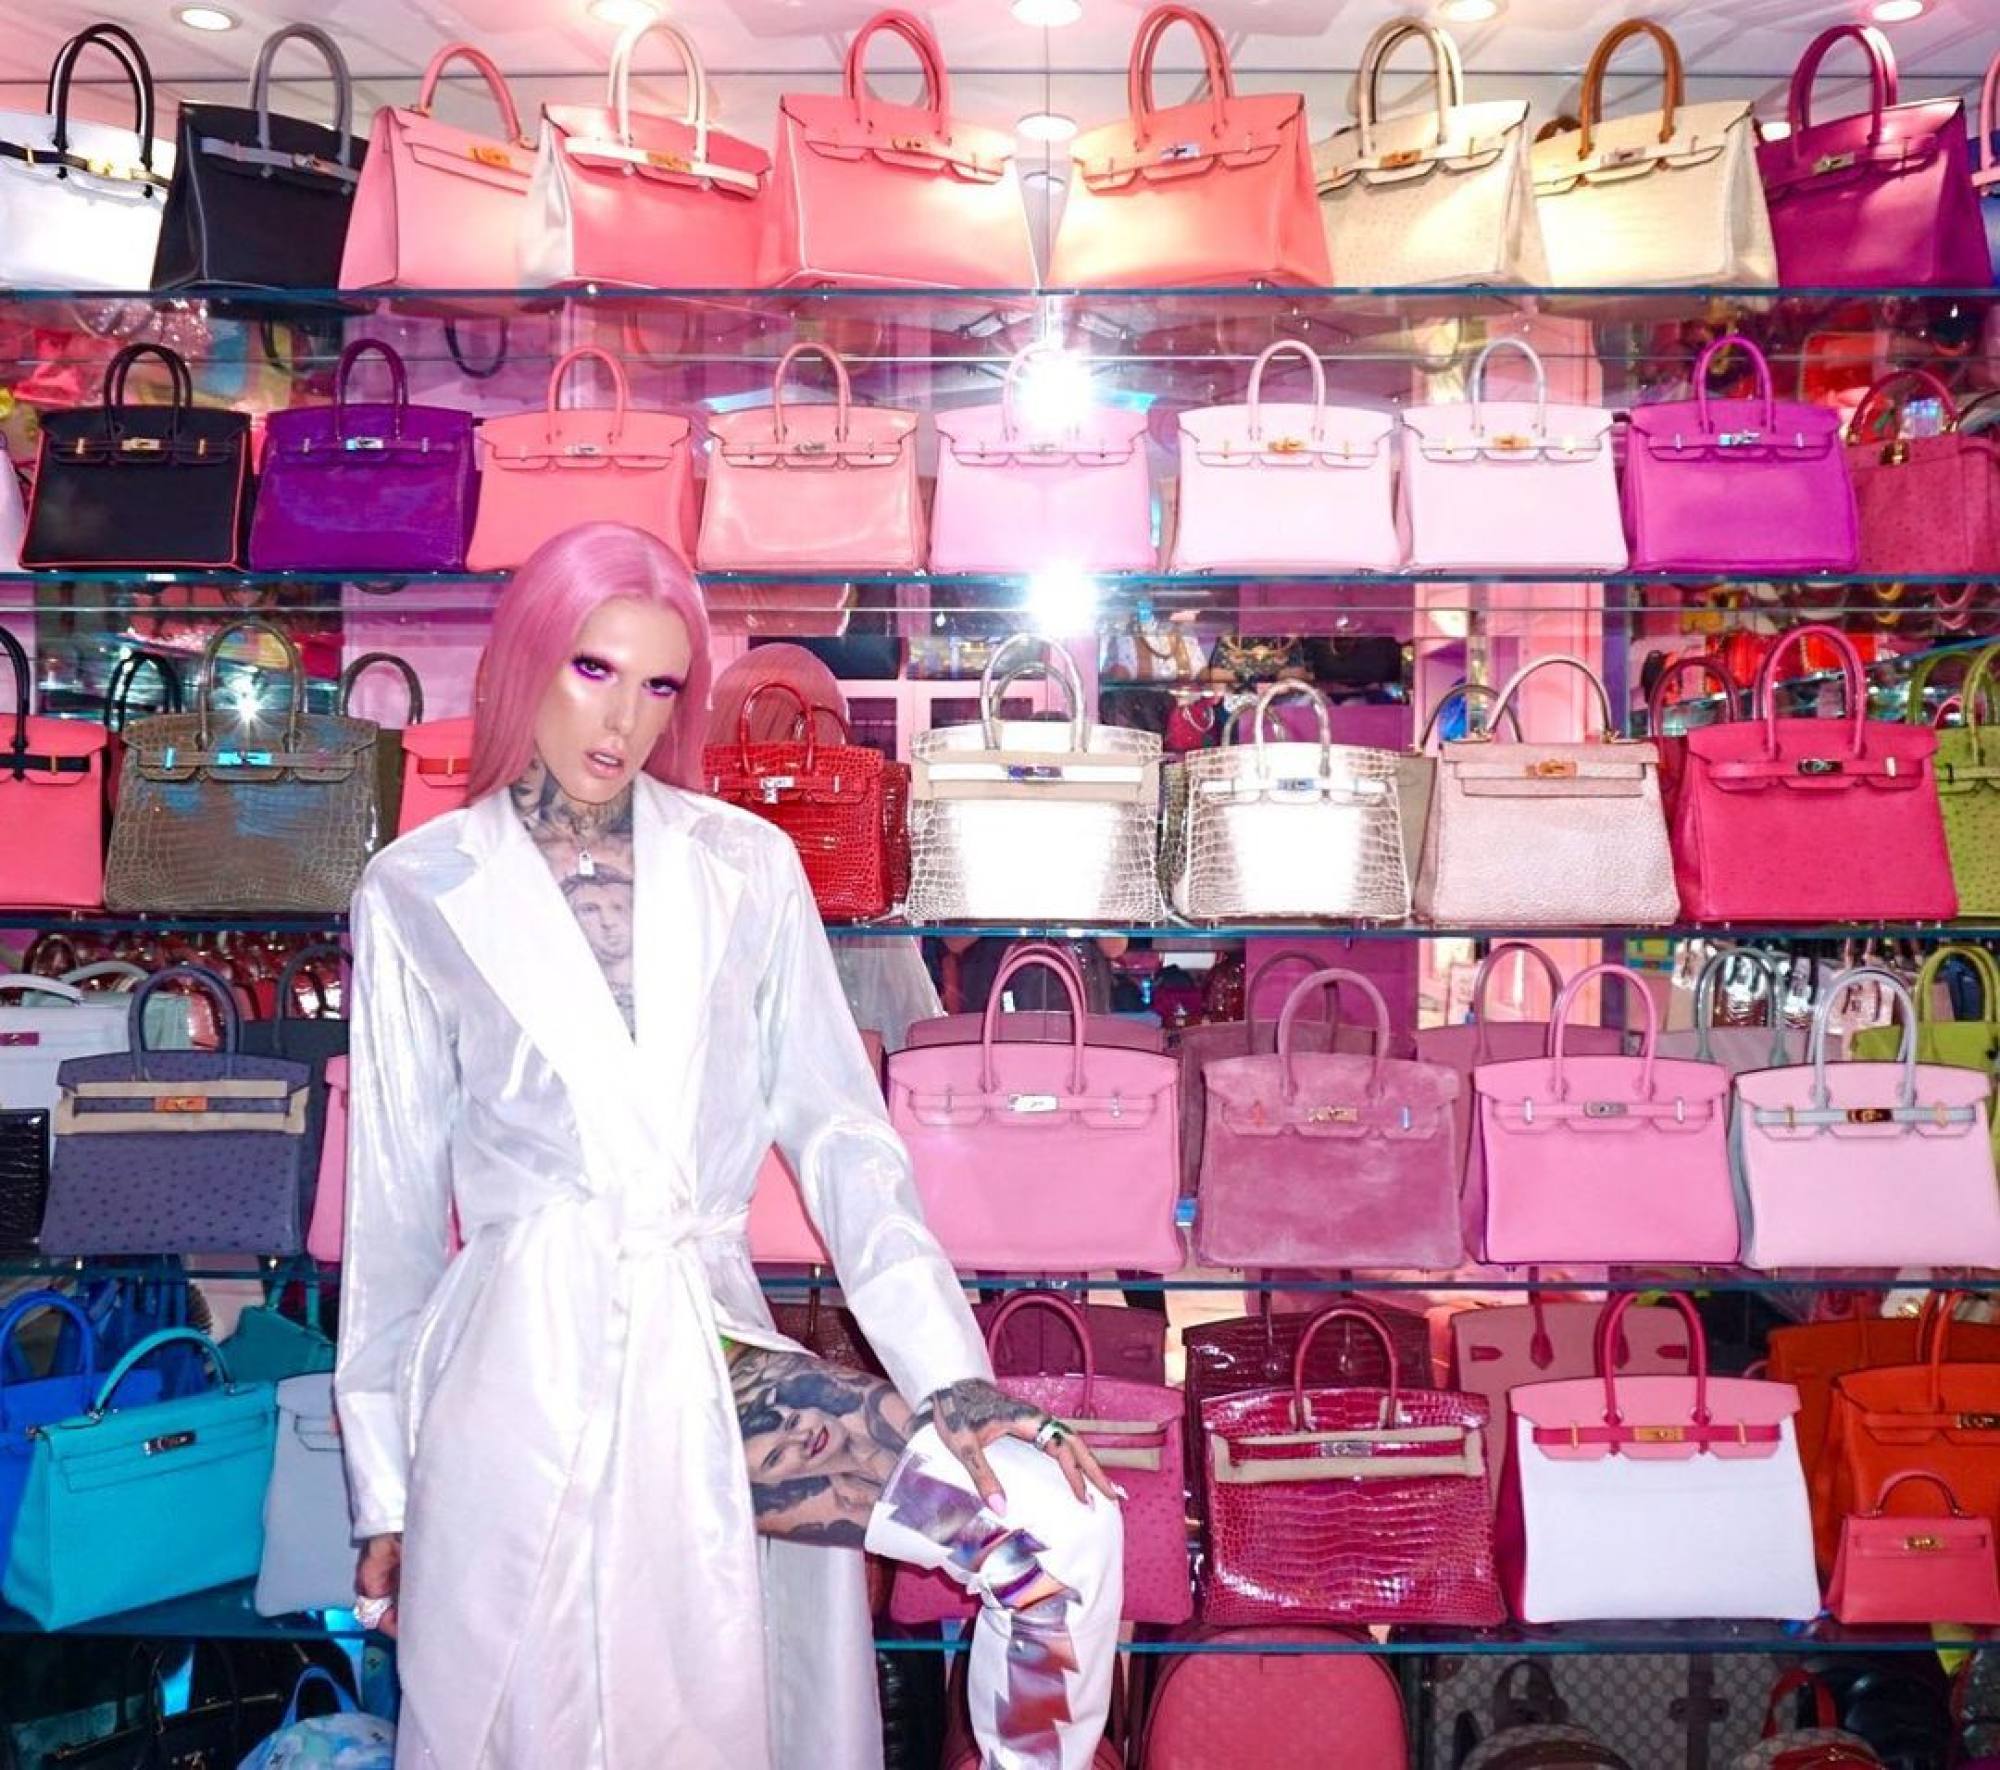 Jeffree Star made “millions” selling huge collection of Birkin